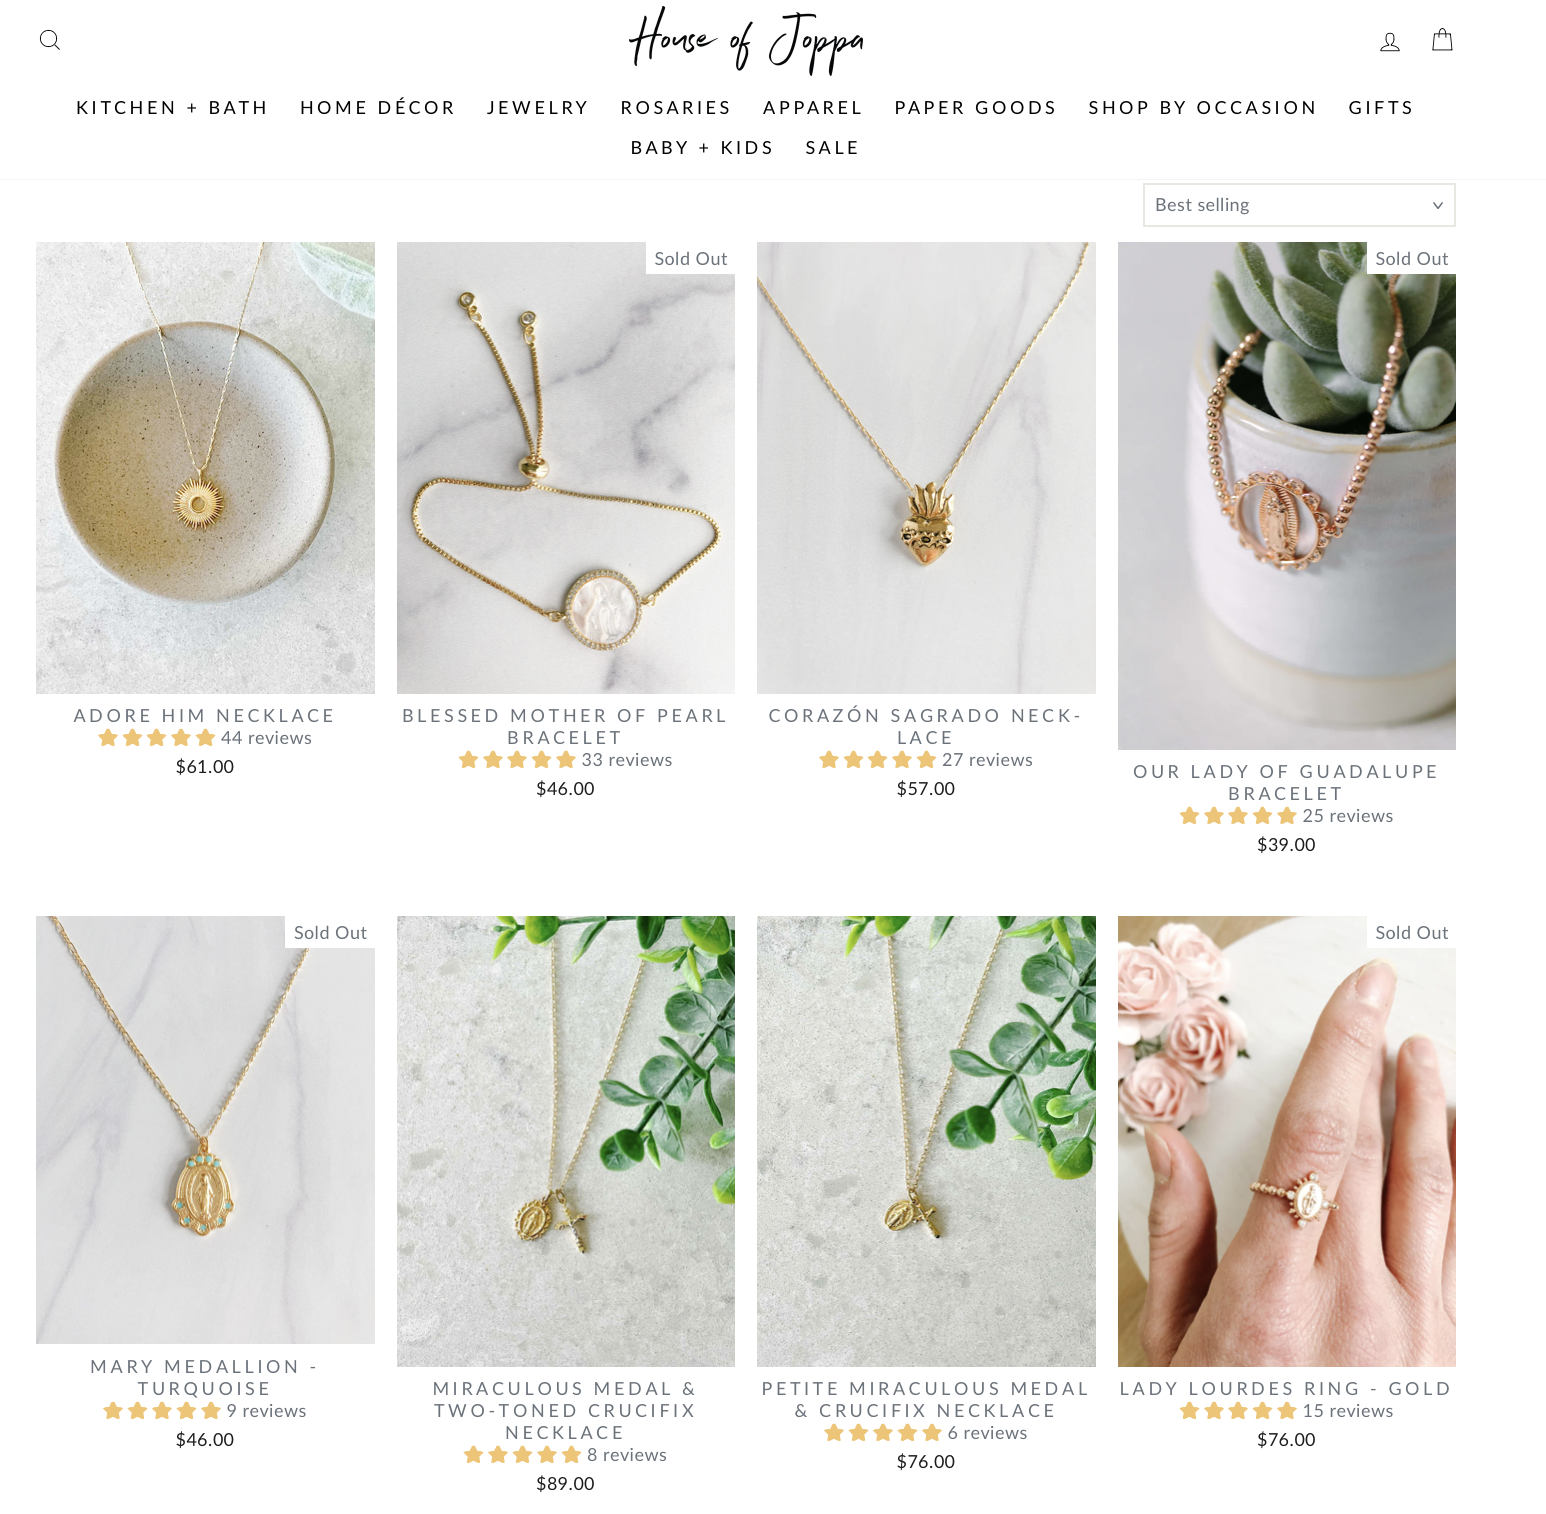 The house of Joppa product page shows multiple jewelry pieces.